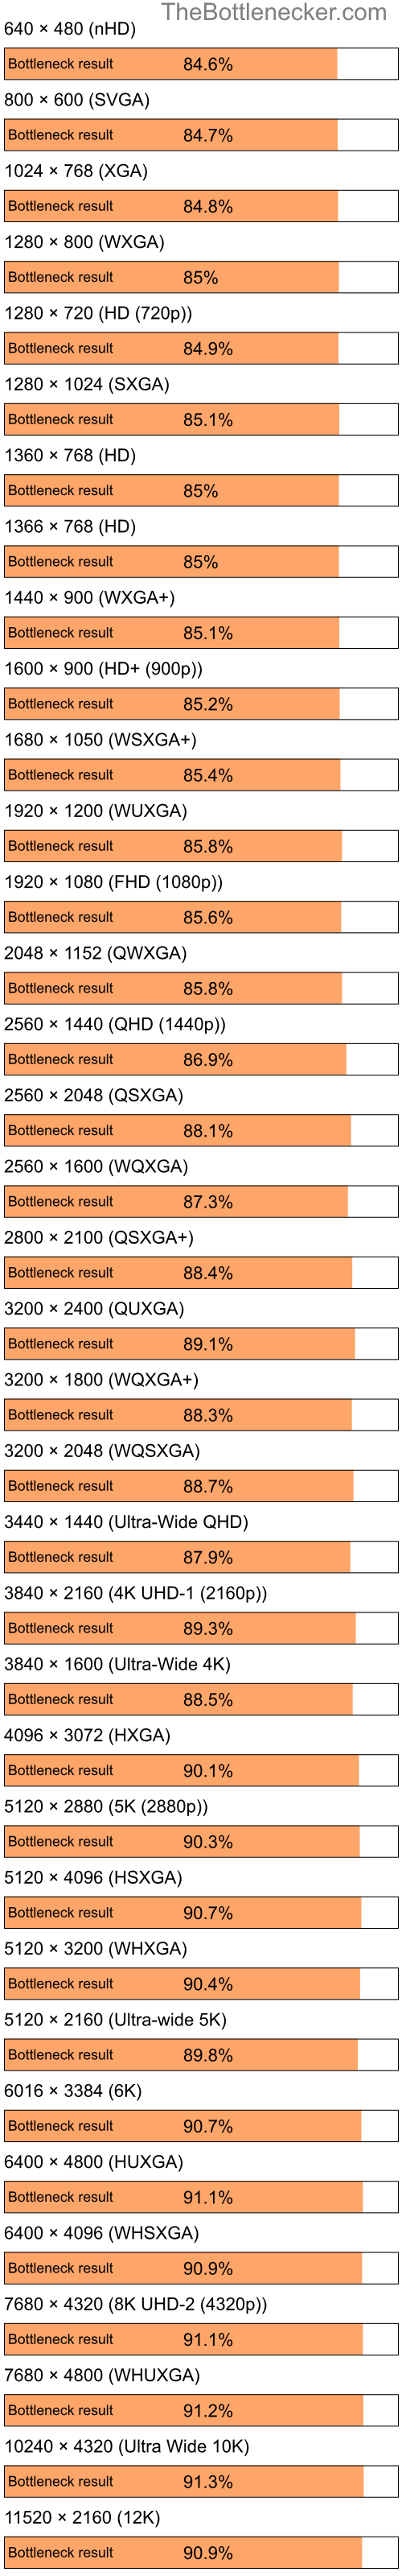 Bottleneck results by resolution for Intel Pentium 4 and NVIDIA GeForce 6150 in Graphic Card Intense Tasks